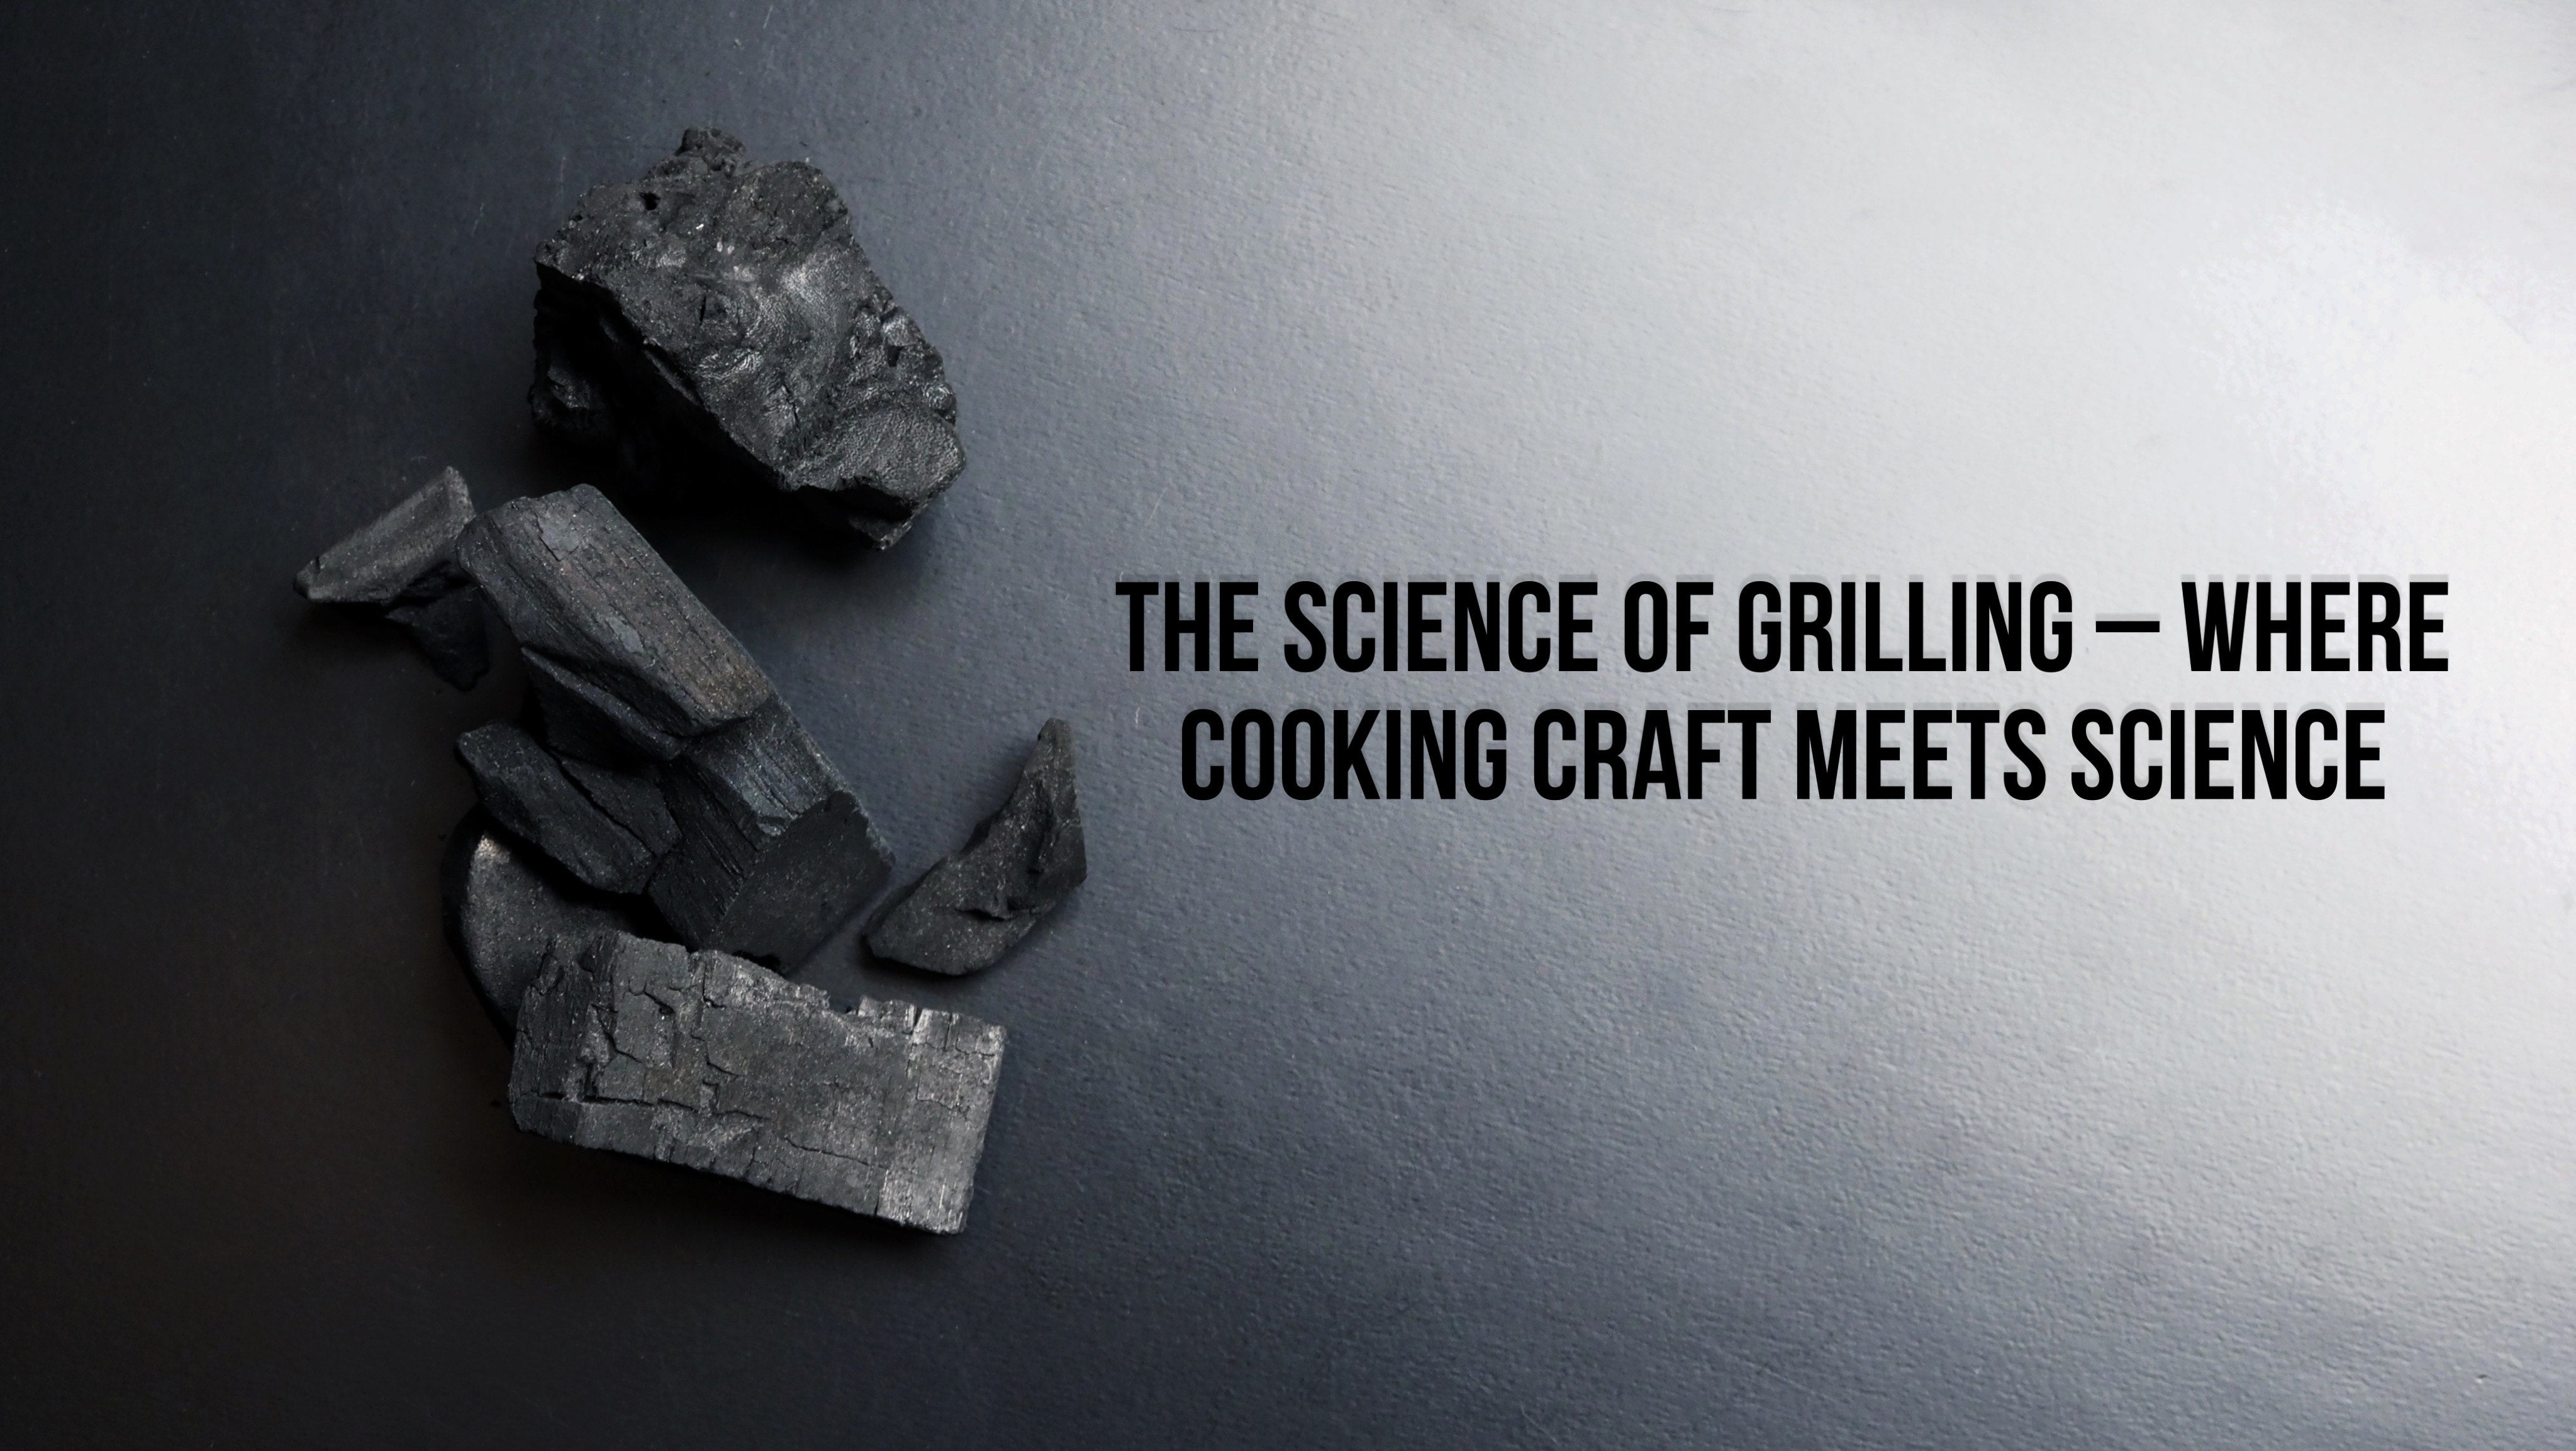 The Science of Grilling - where cooking meets science